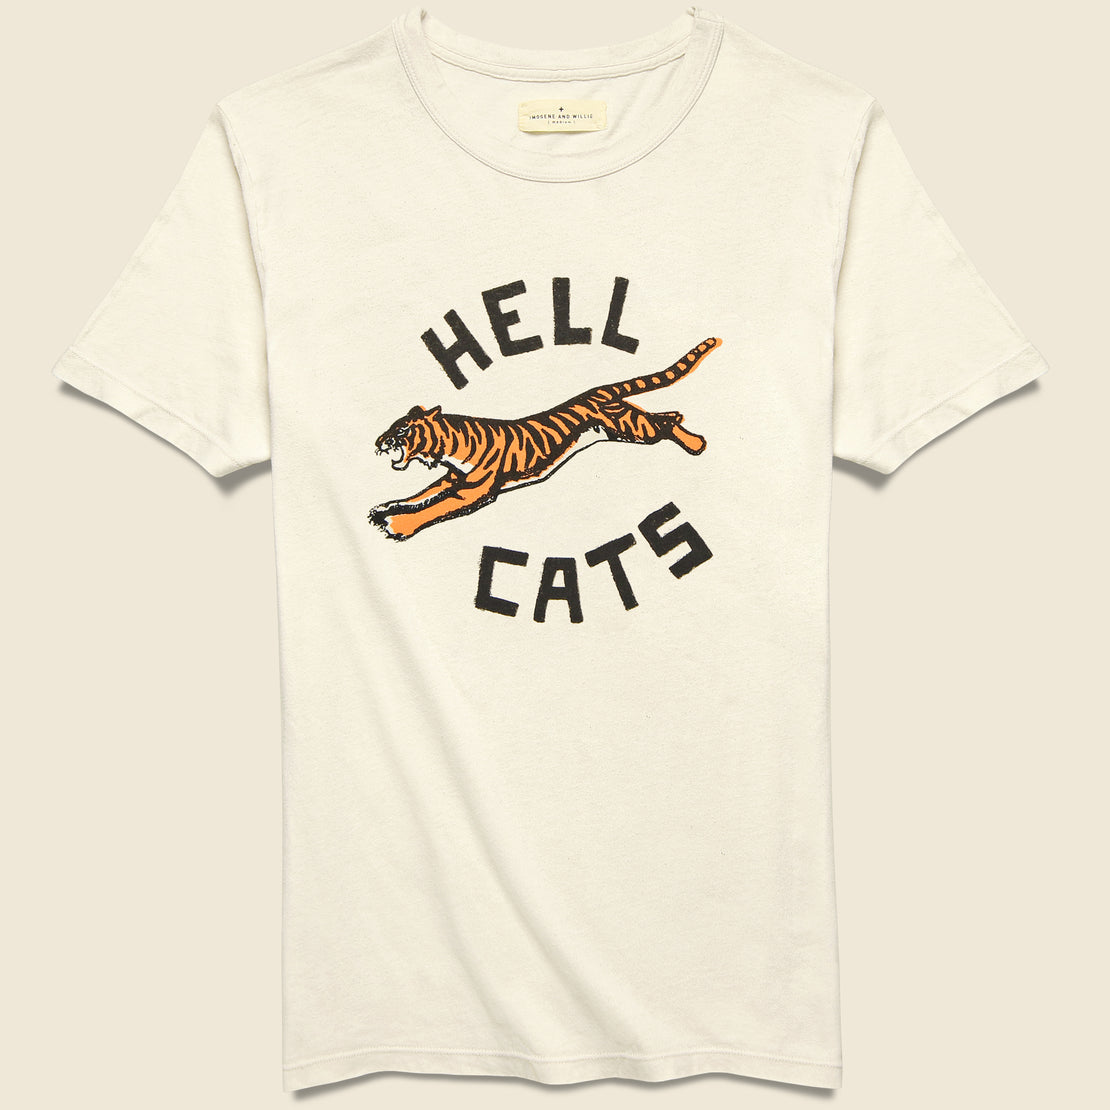 Imogene + Willie Hell Cats Tee - Vintage White